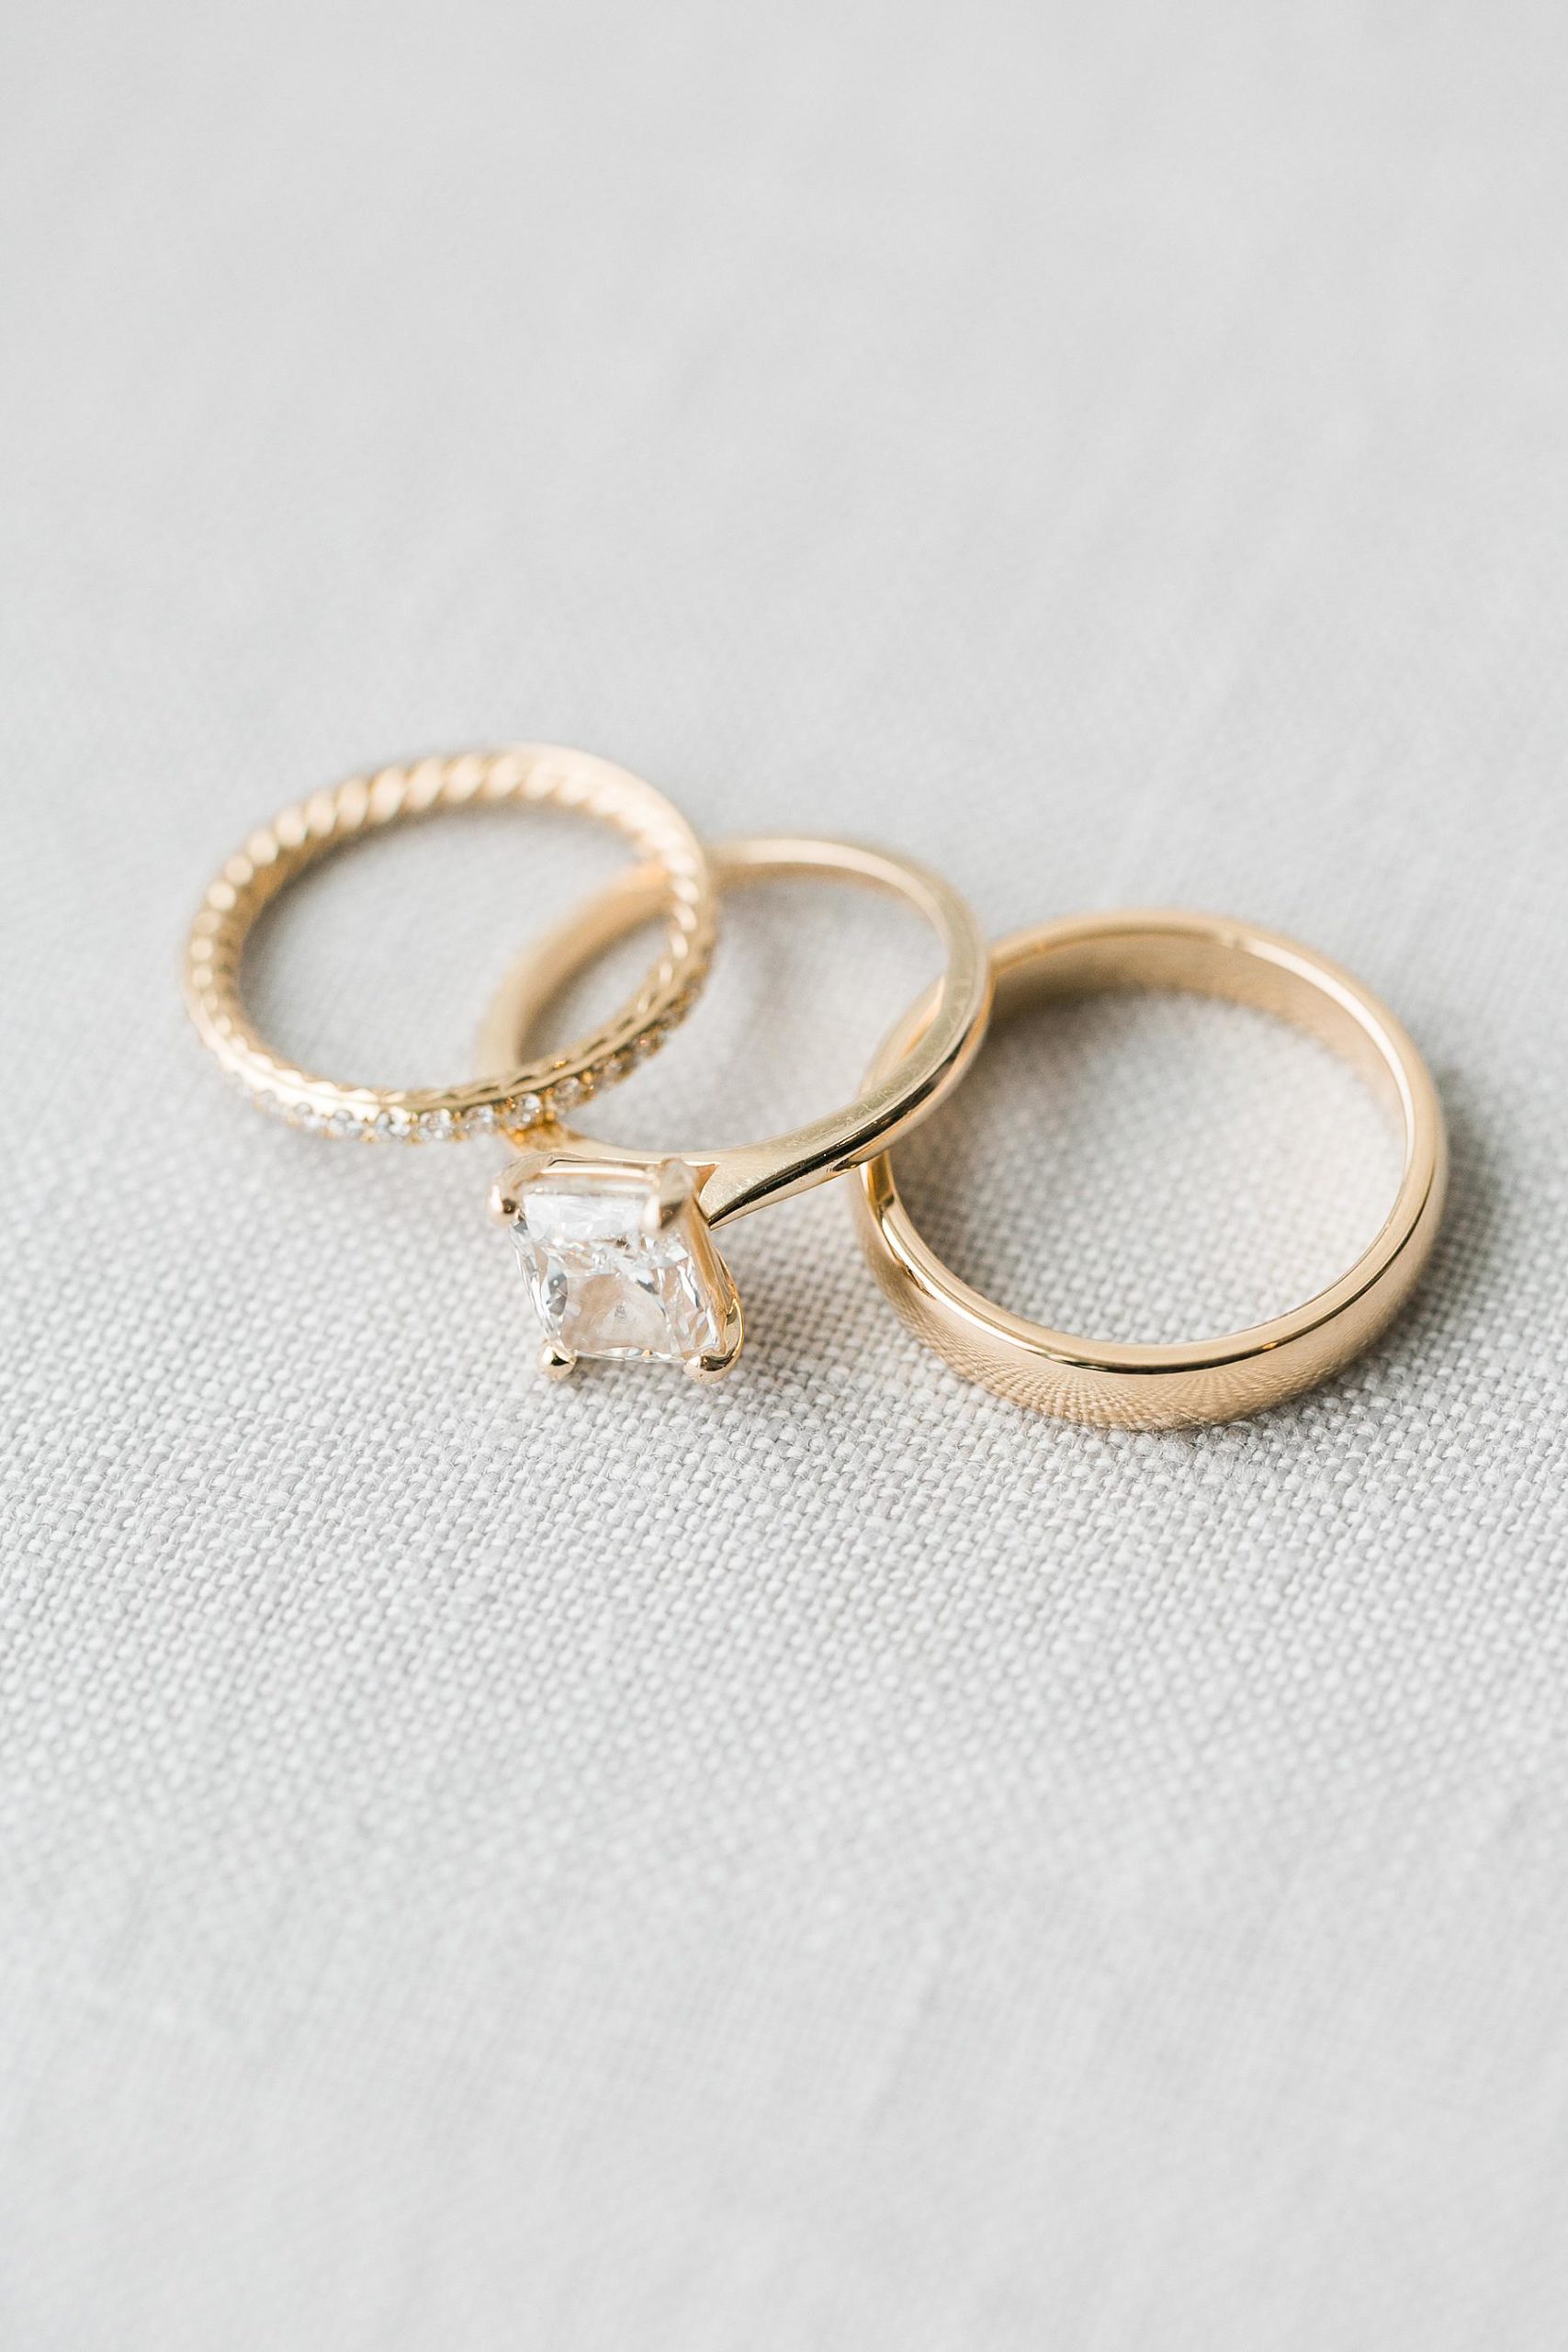 yellow gold wedding rings bands on linen background